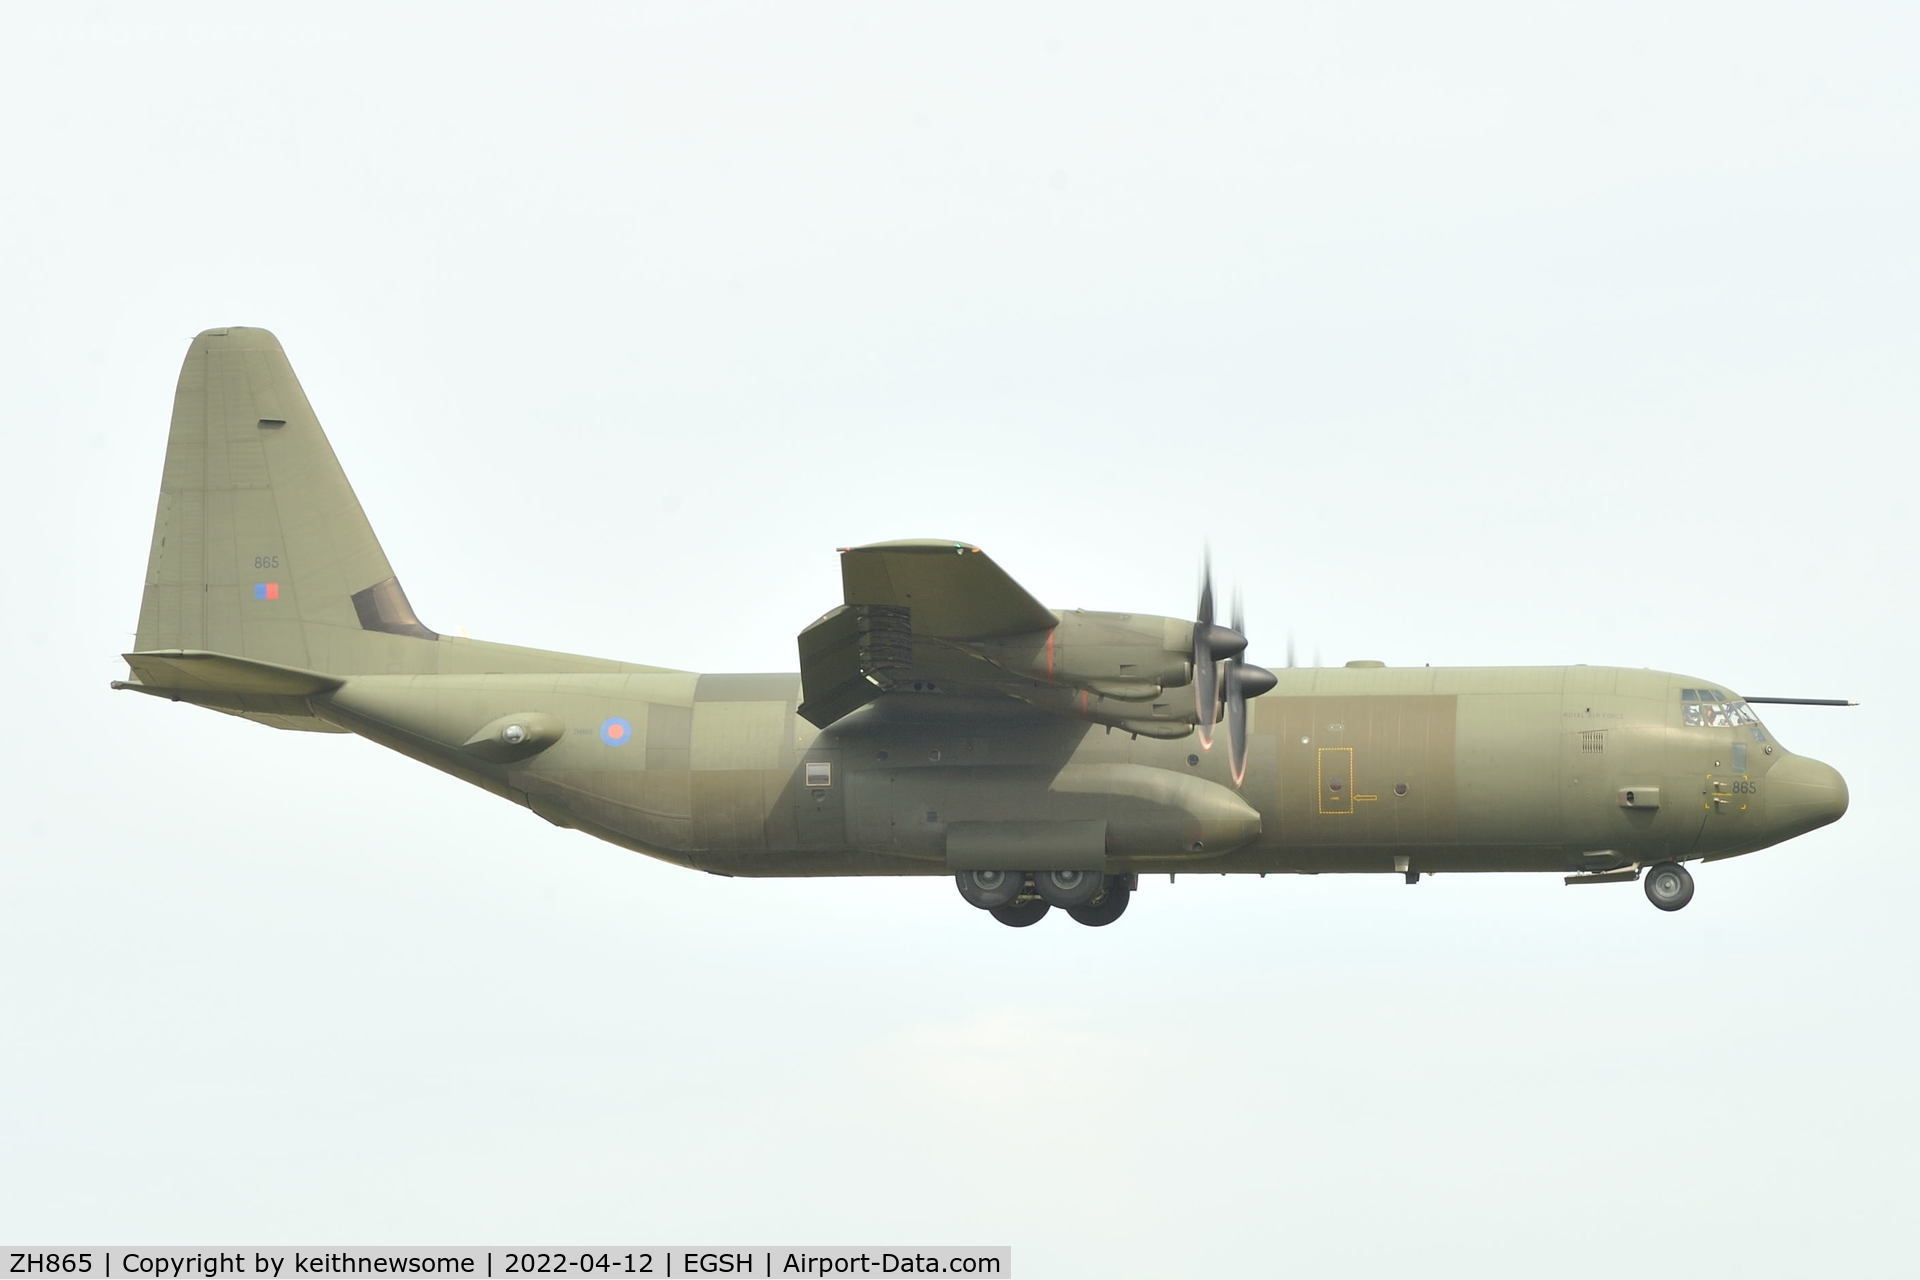 ZH865, 1996 Lockheed Martin C-130J-30 Hercules C.4 C/N 382-5408, From Brize Norton for circuits !